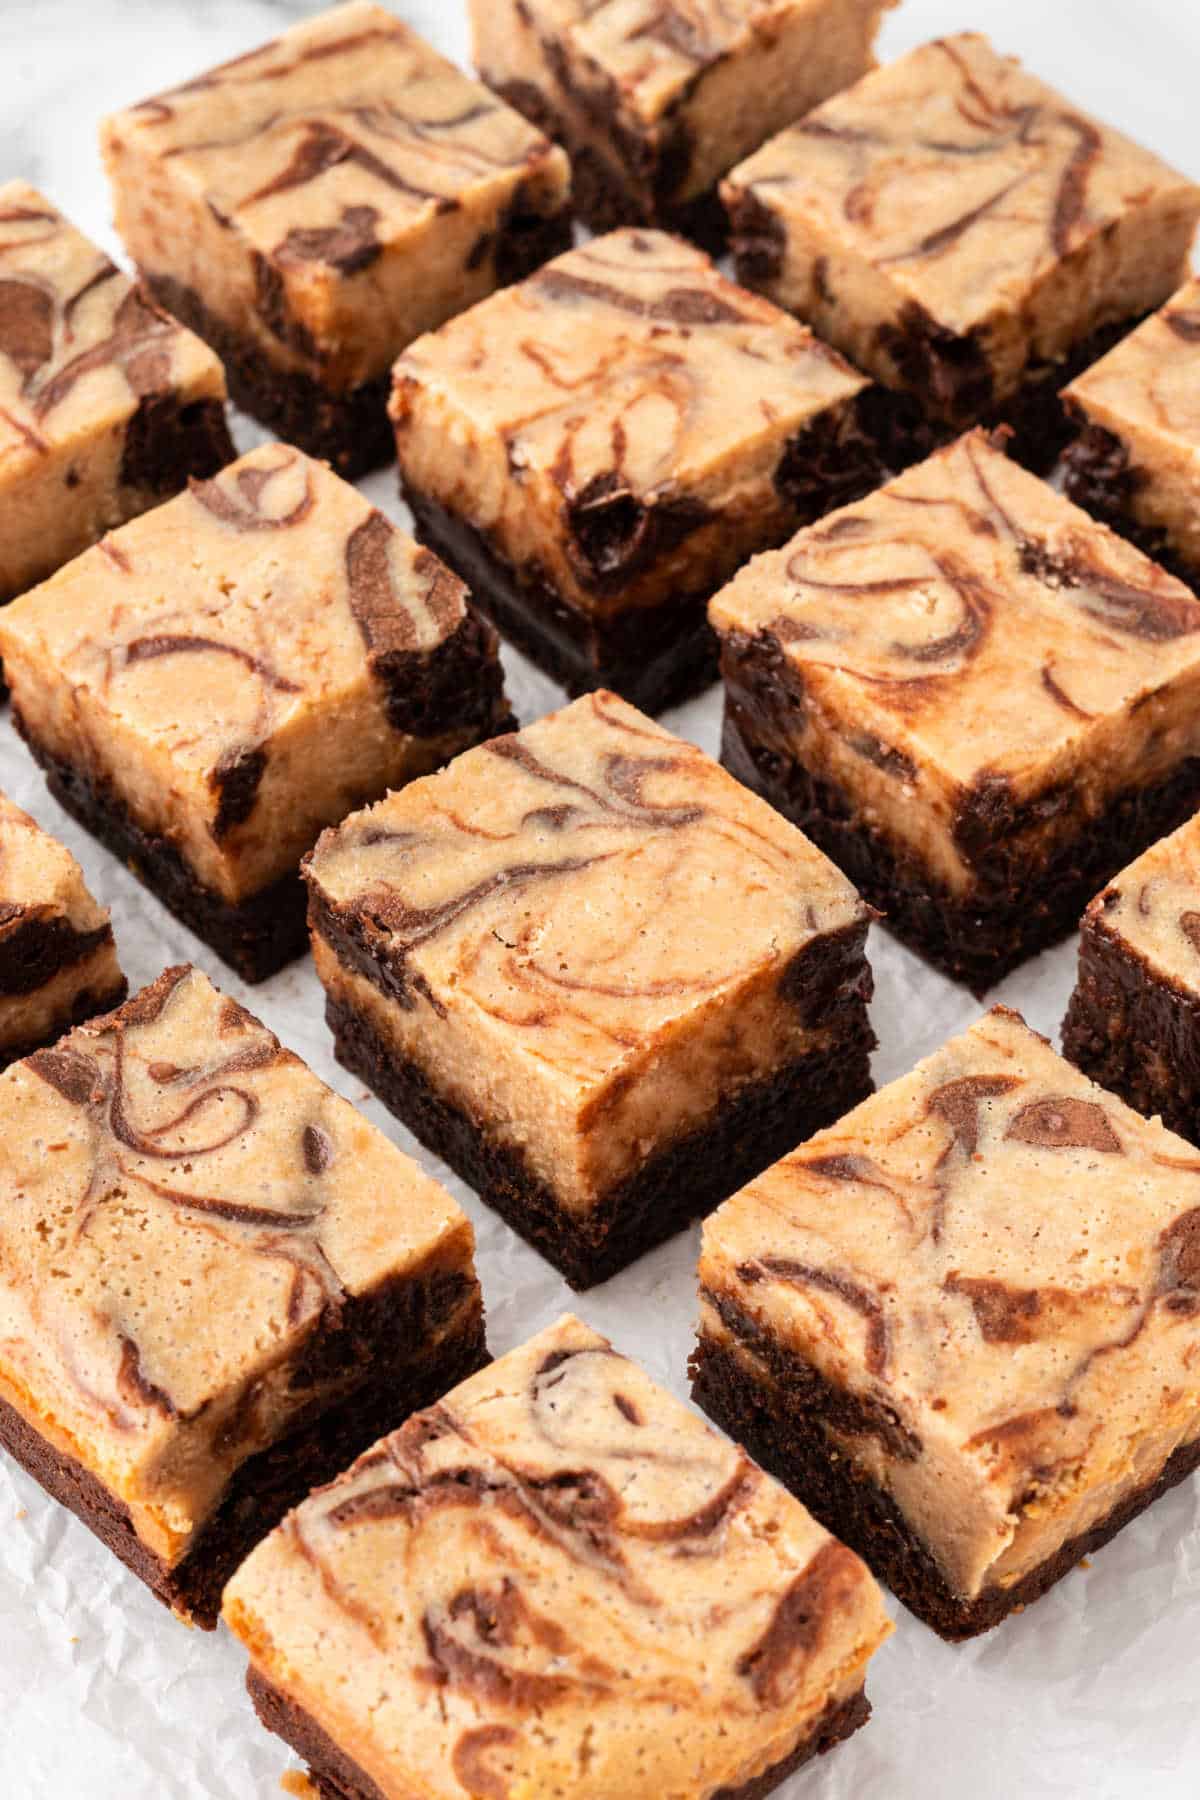 Peanut butter cheesecake brownies cut into bars.